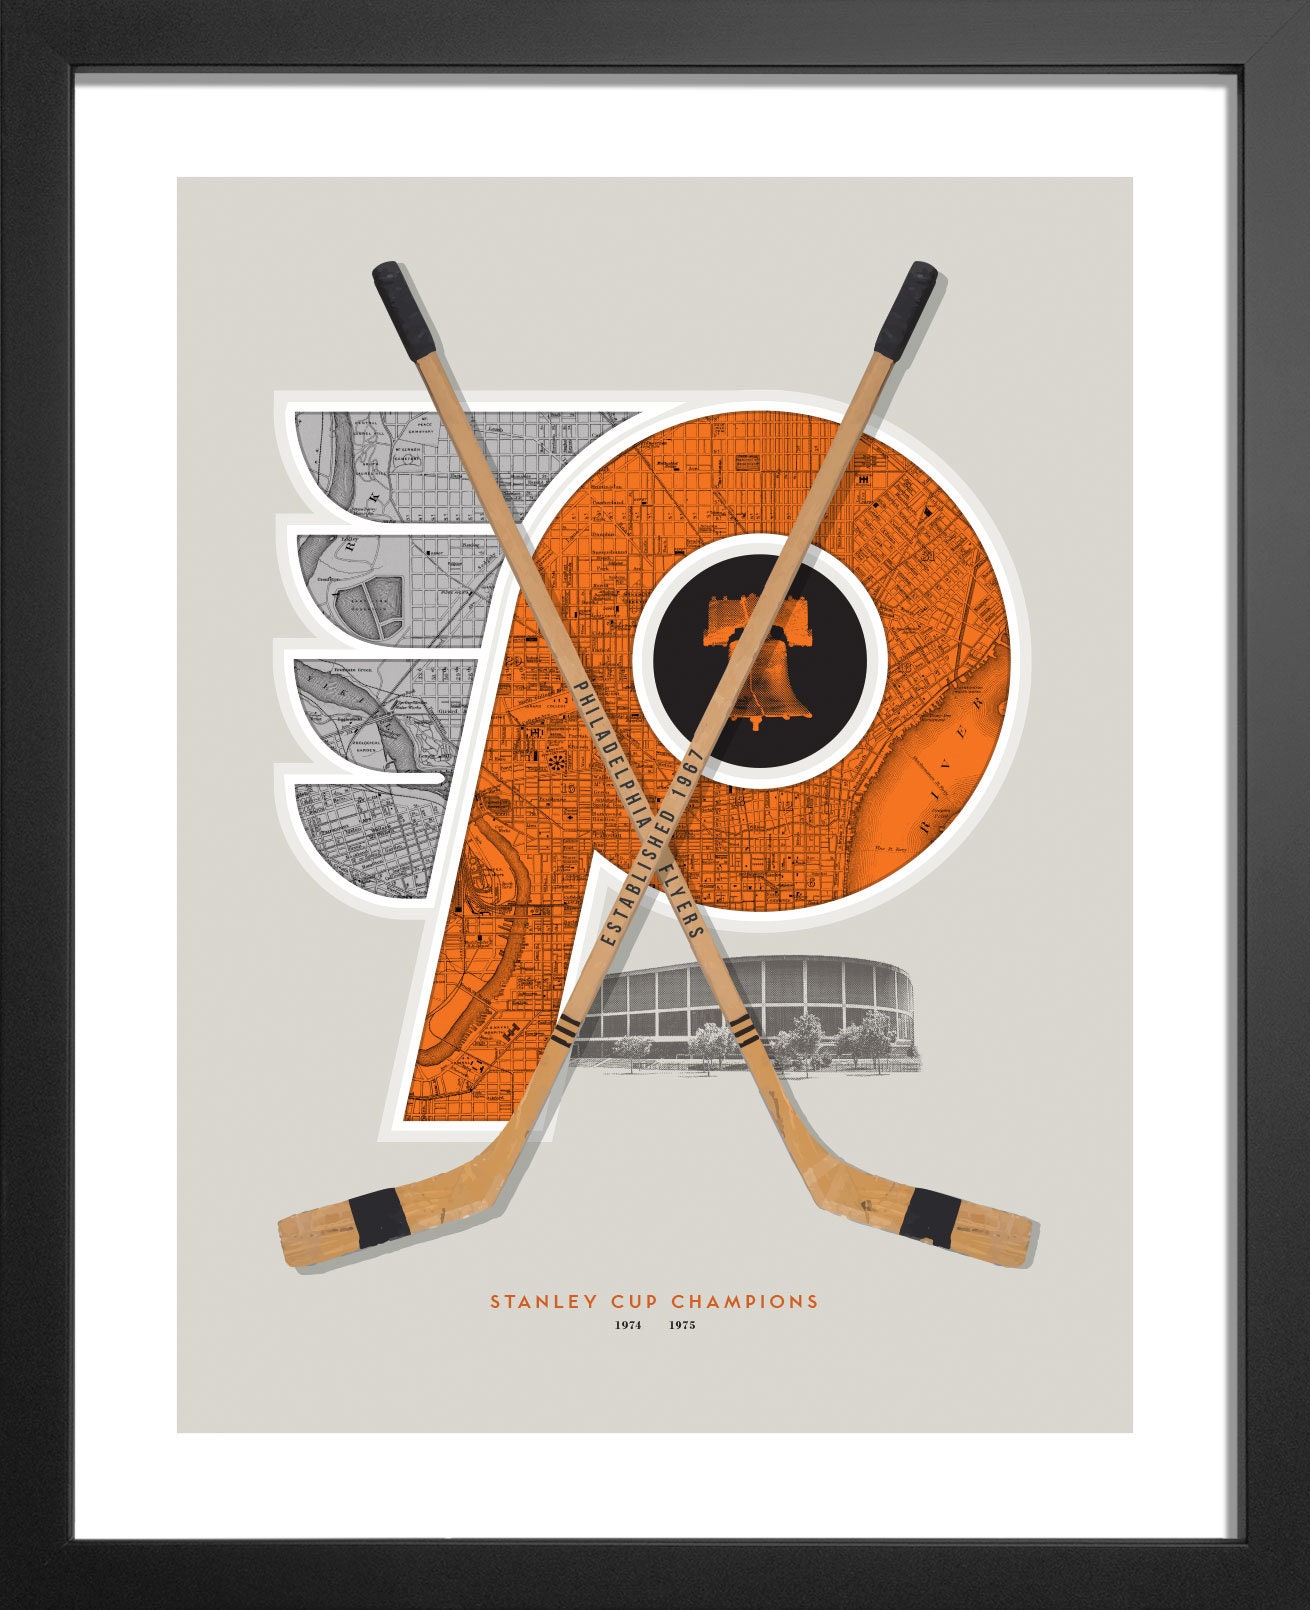 Philadelphia Flyers on X: A closer look at the painting presented